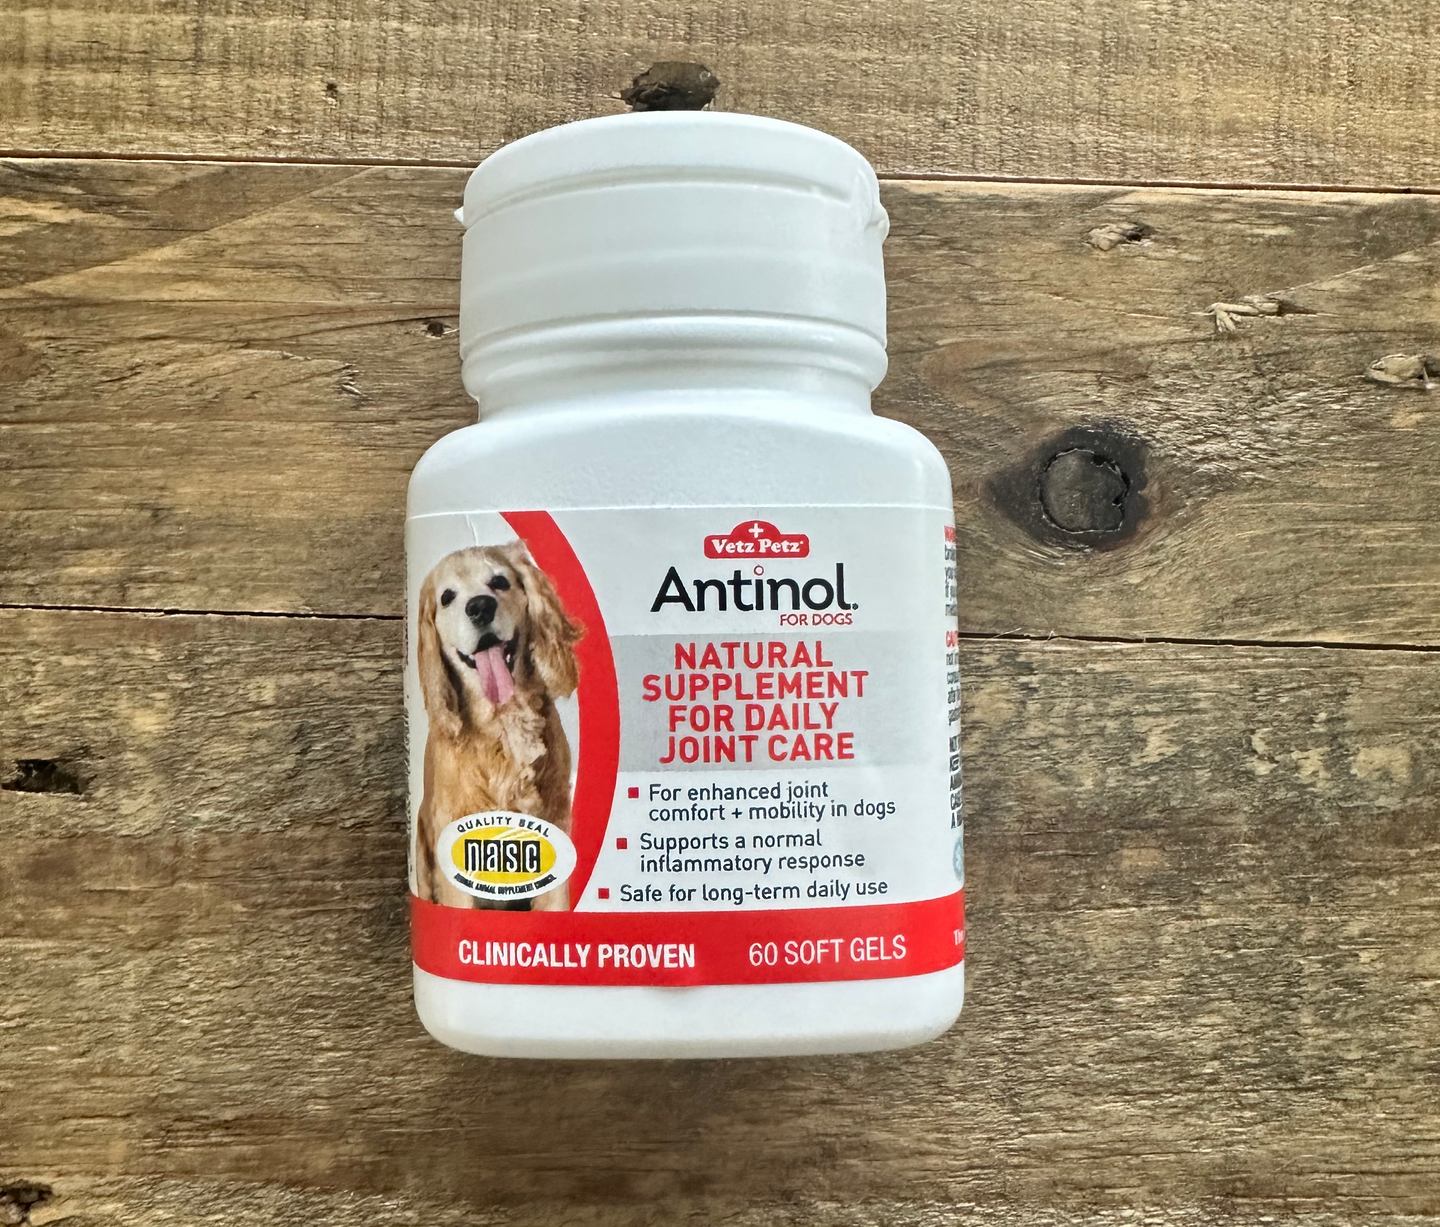 a bottle of antnol plus natural supplement for daily joint care is sitting on a wooden table .